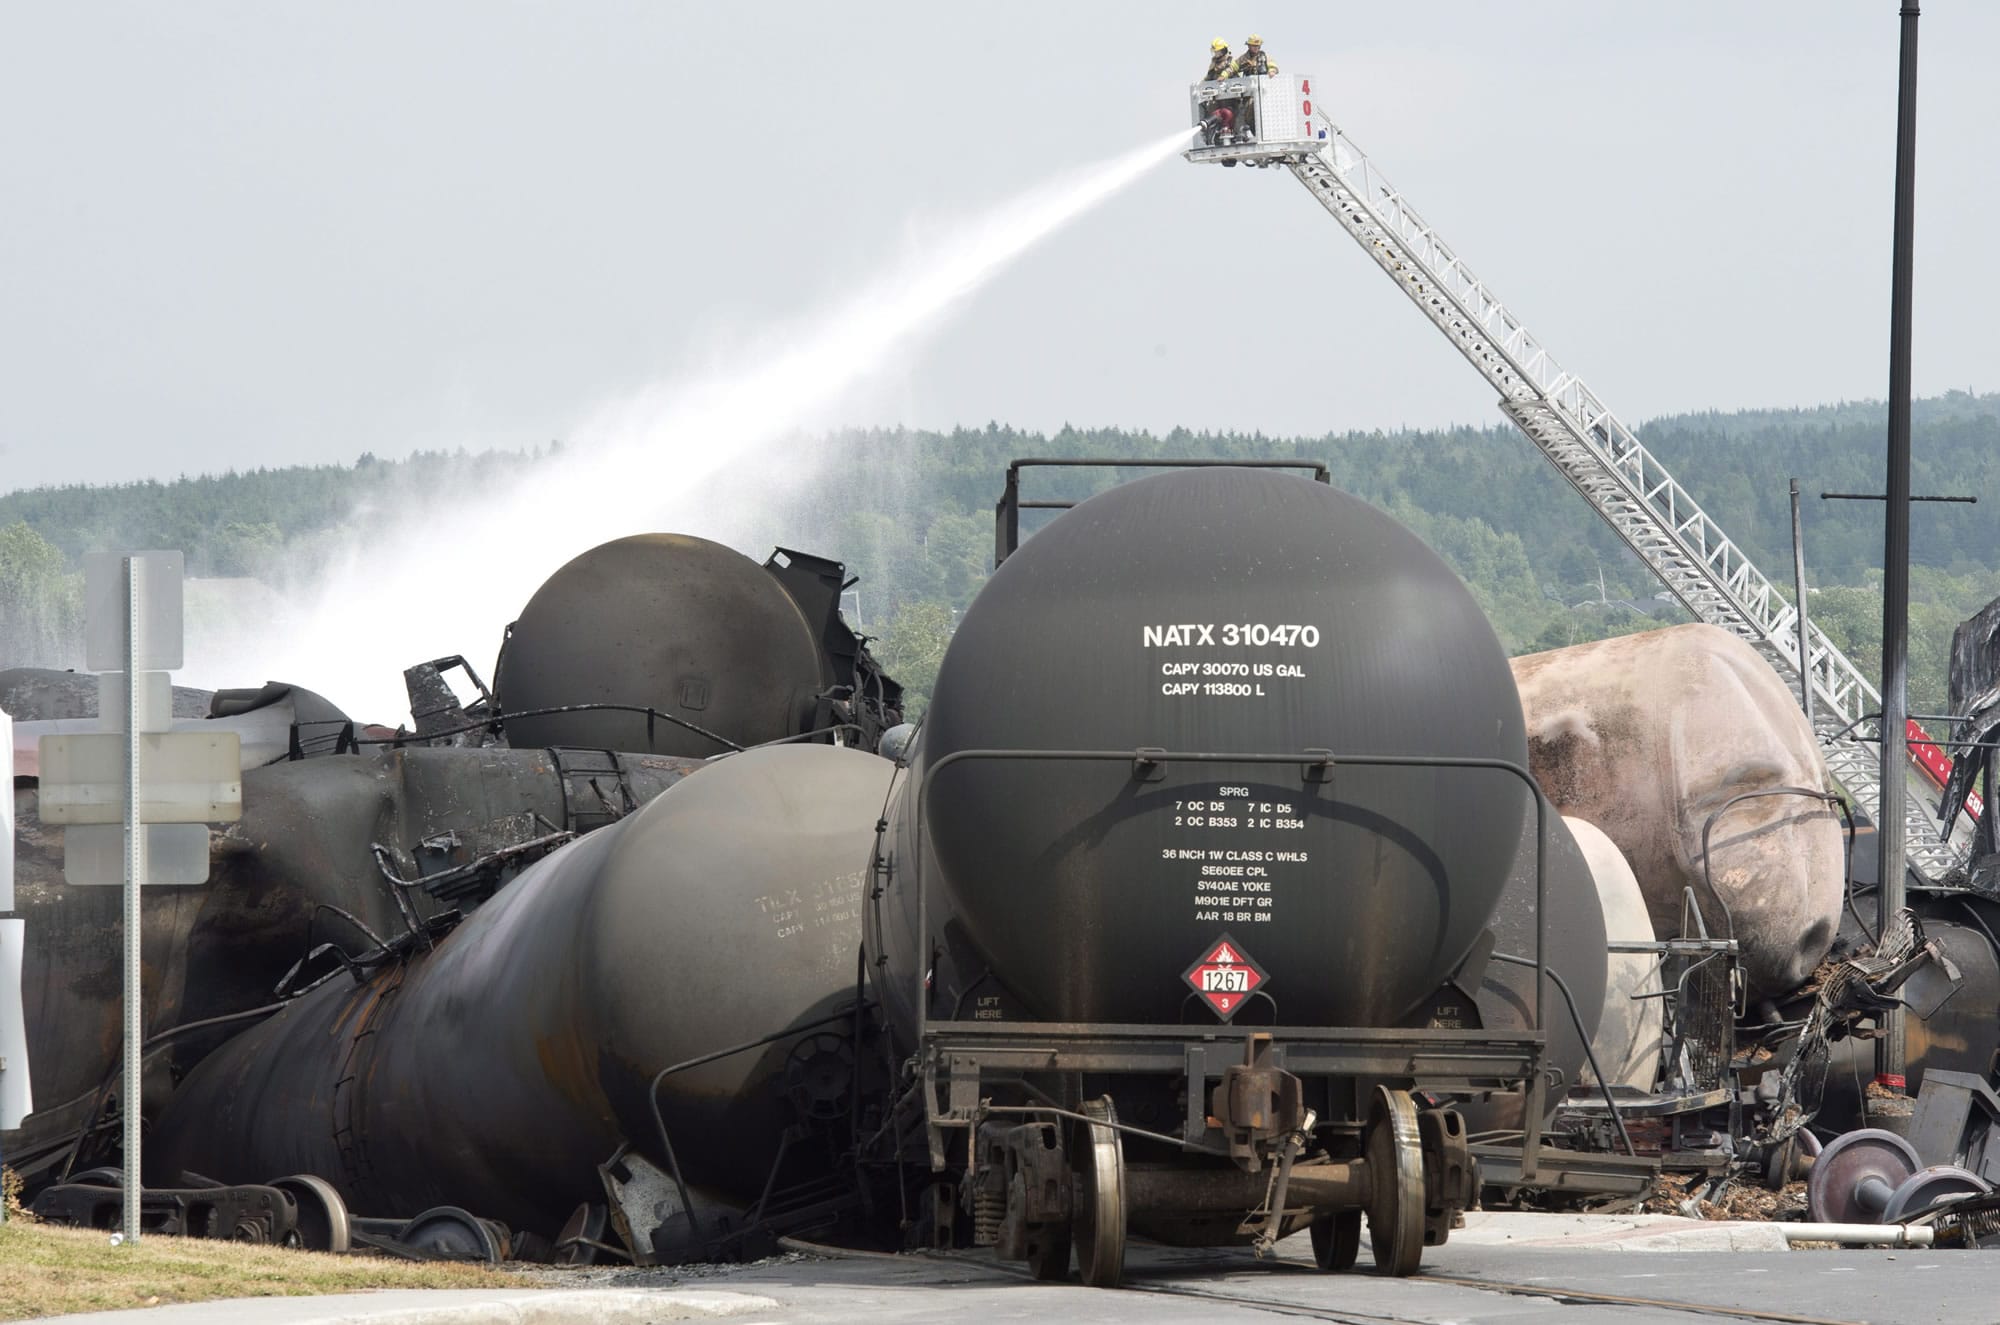 Firefighters water railway cars the day after a train derailed causing explosions of railway cars carrying crude oil in Lac Megantic, Quebec, on July 7.